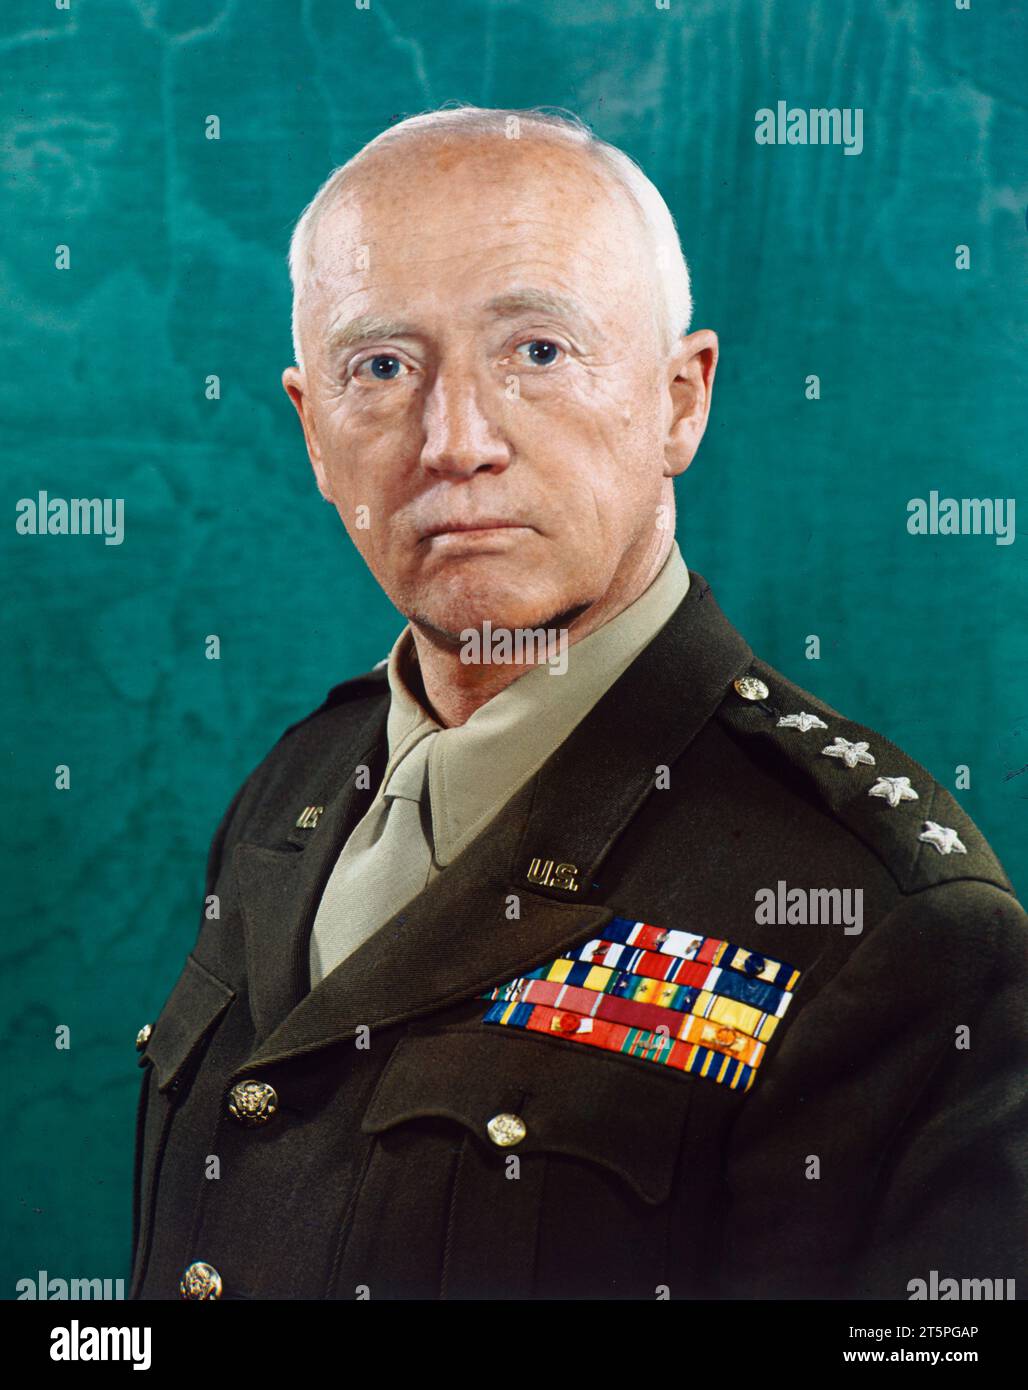 George Patton. Portrait of the American General, George Smith Patton Jr. (1885-1945), 1945 Stock Photo